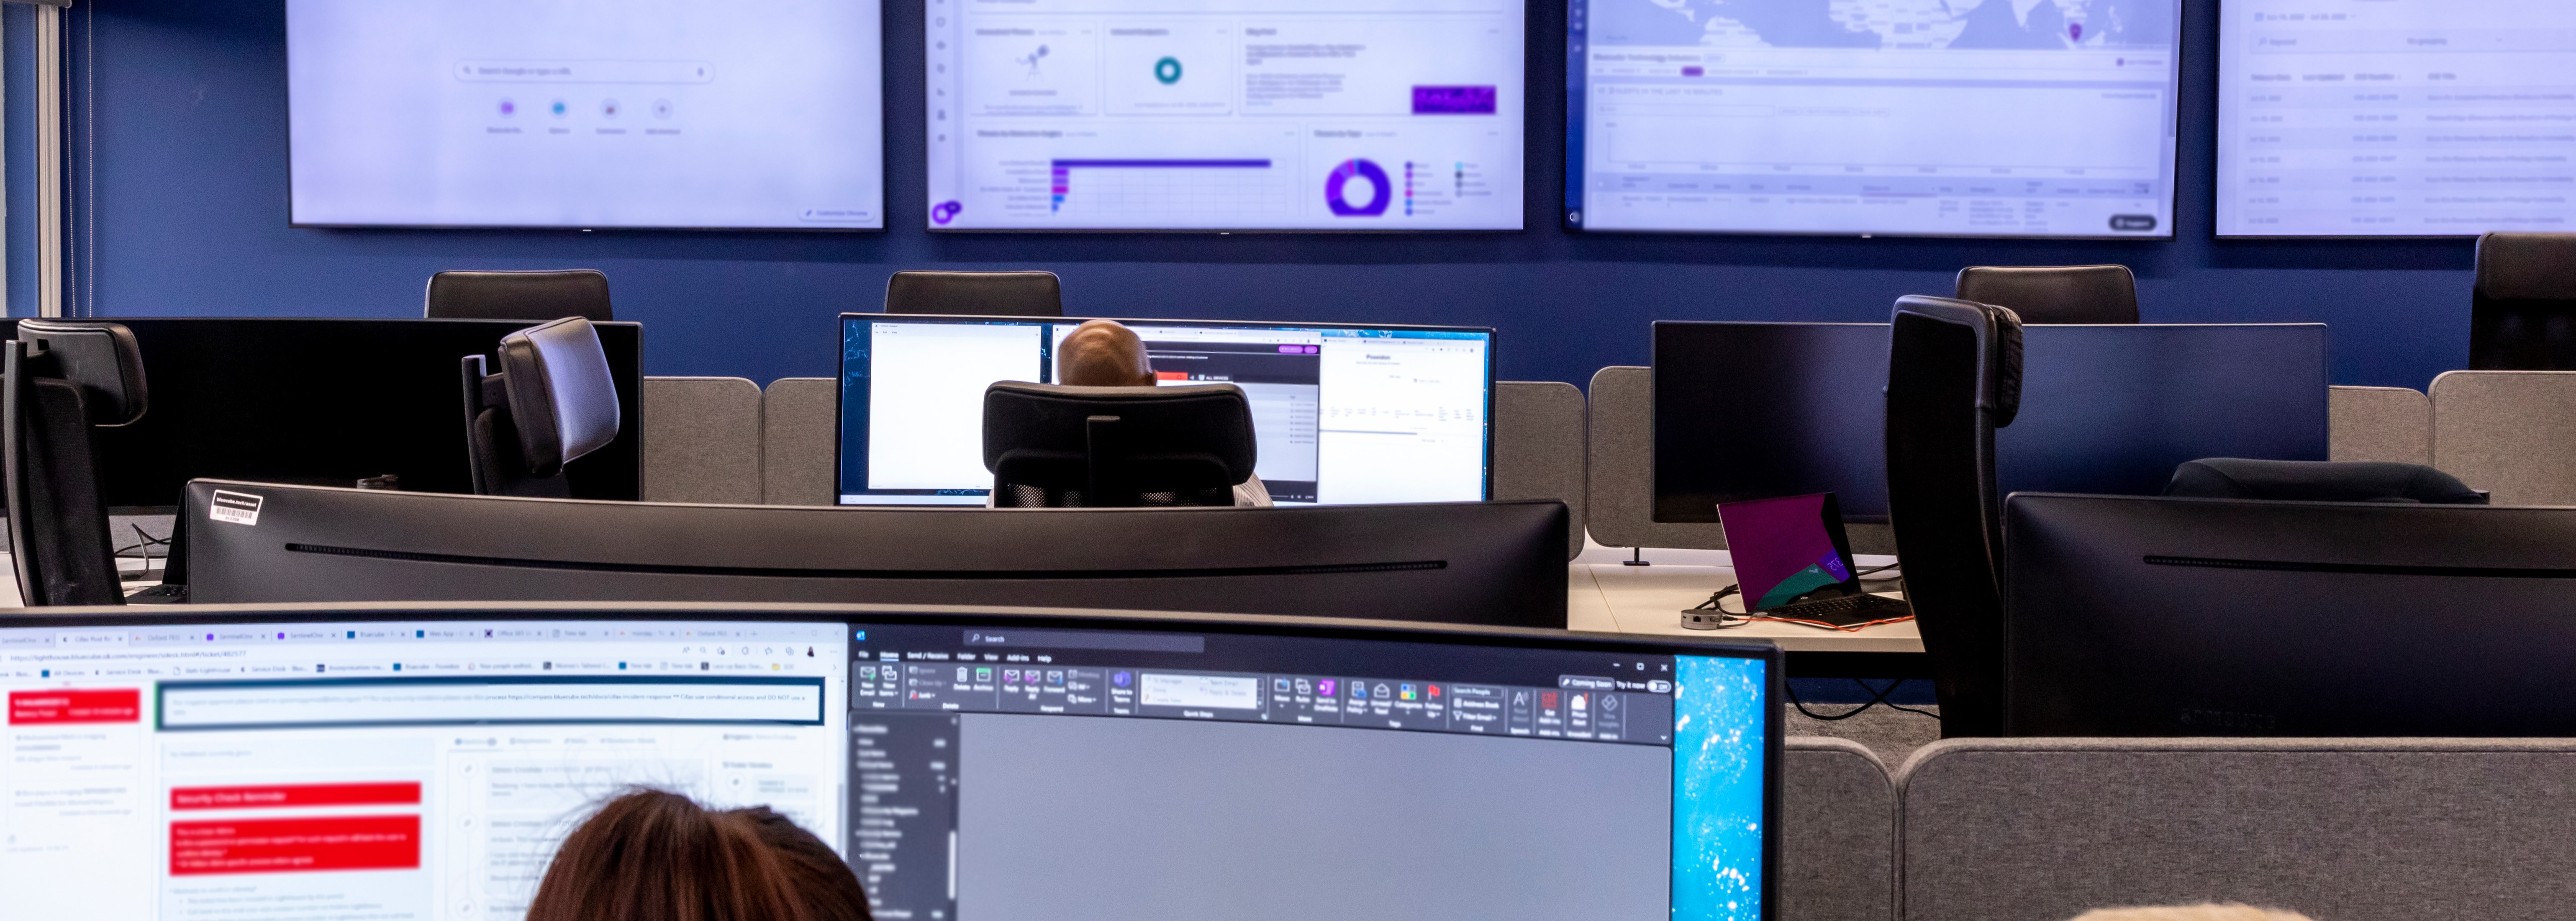 Security operations team working monitoring screens 